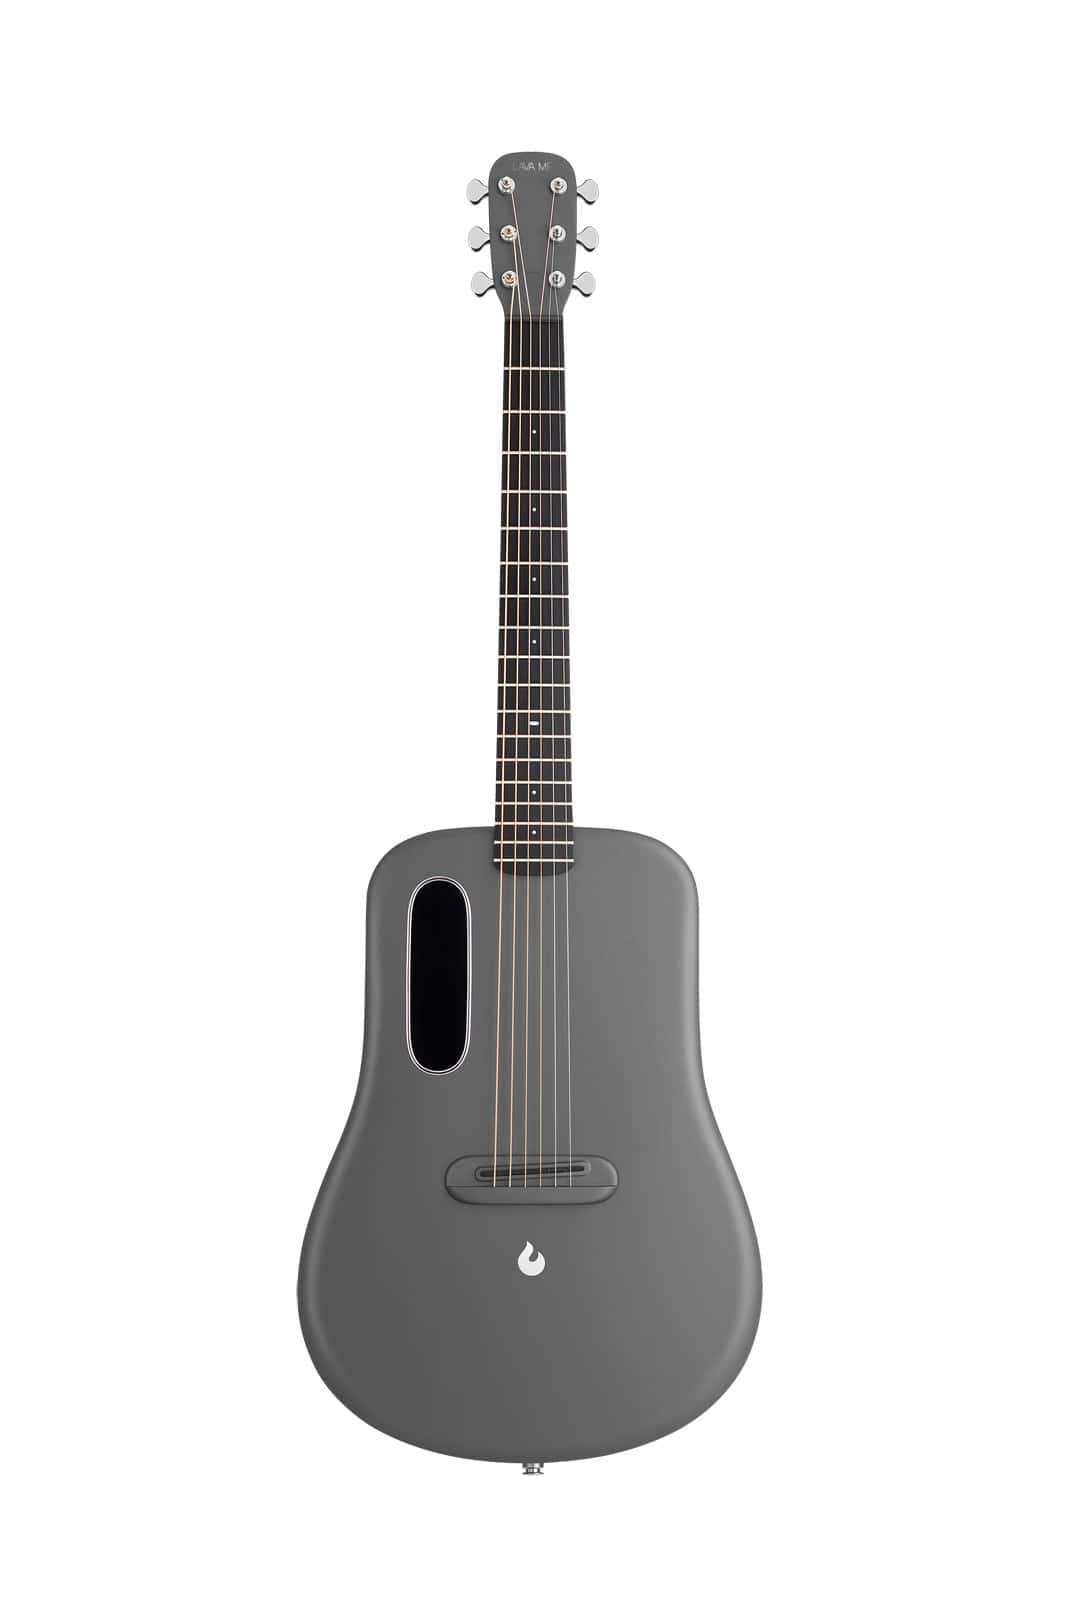 LAVA MUSIC LAVA ME 4 CARBON SERIES 38'' SPACE GREY - WITH SPACE BAG